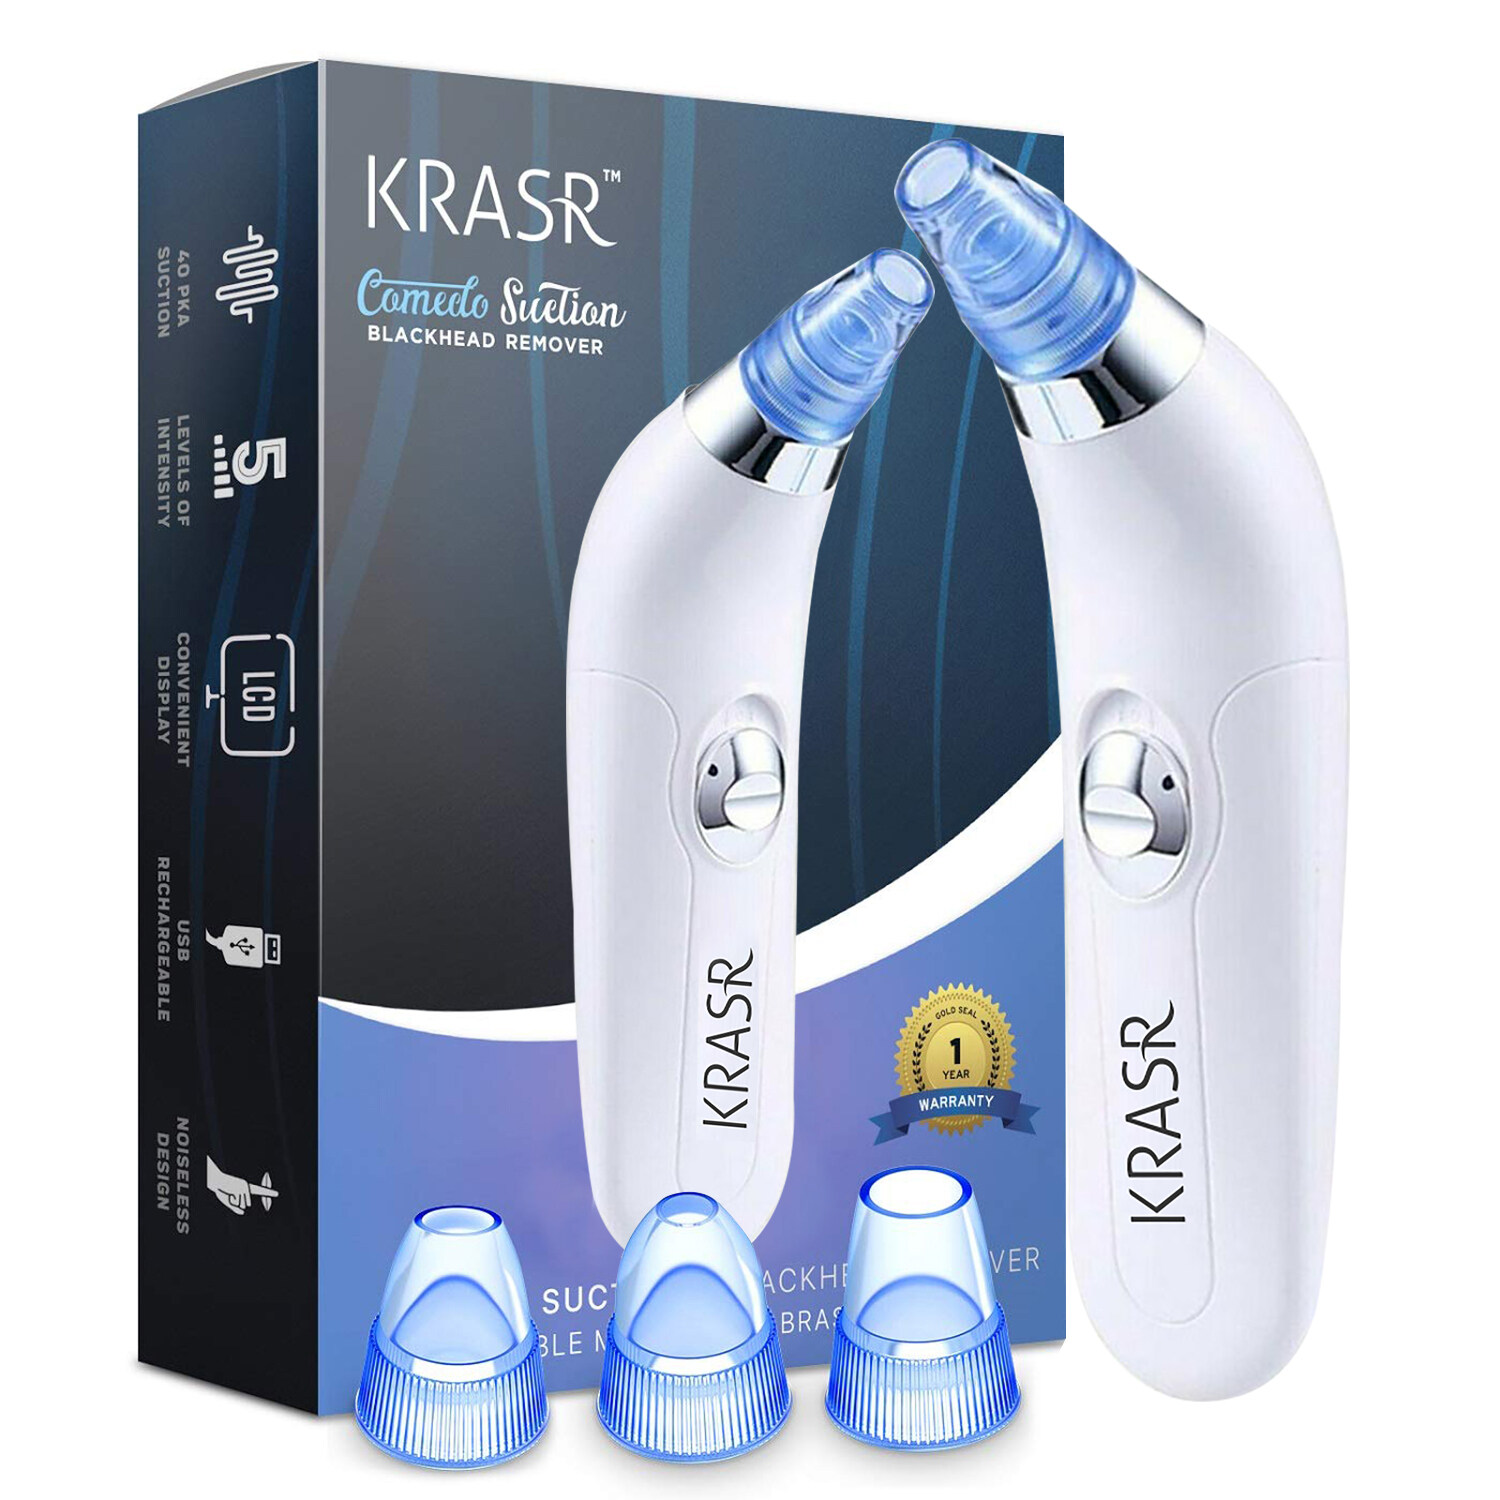 KRASR The Original Blackhead Remover Vacuum - Facial Pore Deep Cleanser - Electric Comedone Extractor Kit - Blackhead Remover - Pimple Remover - Blackhead remover vacuum - blackhead remover tool - Nose Acne Vacuum - USB Rechargeable with LED Display